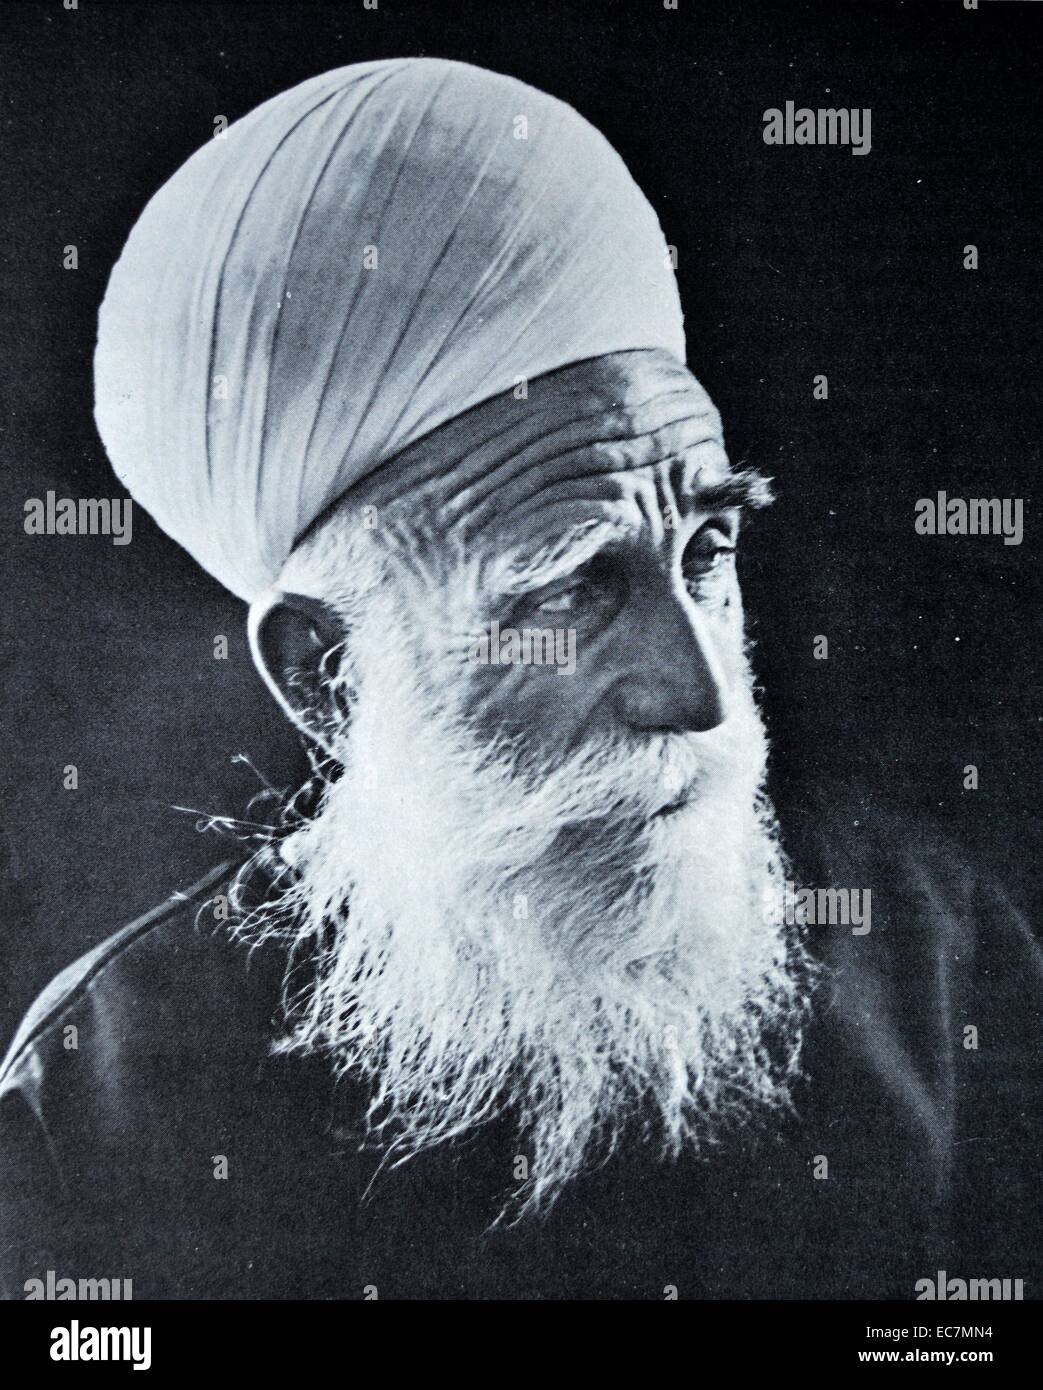 Amin Tarif 1898 - 1993. Qadi, or spiritual leader, of the Druze in Israel from 1928 till his death in 1993. Sheikh Amin was regarded by many within the community as the preeminent spiritual authority in the Druze world Stock Photo